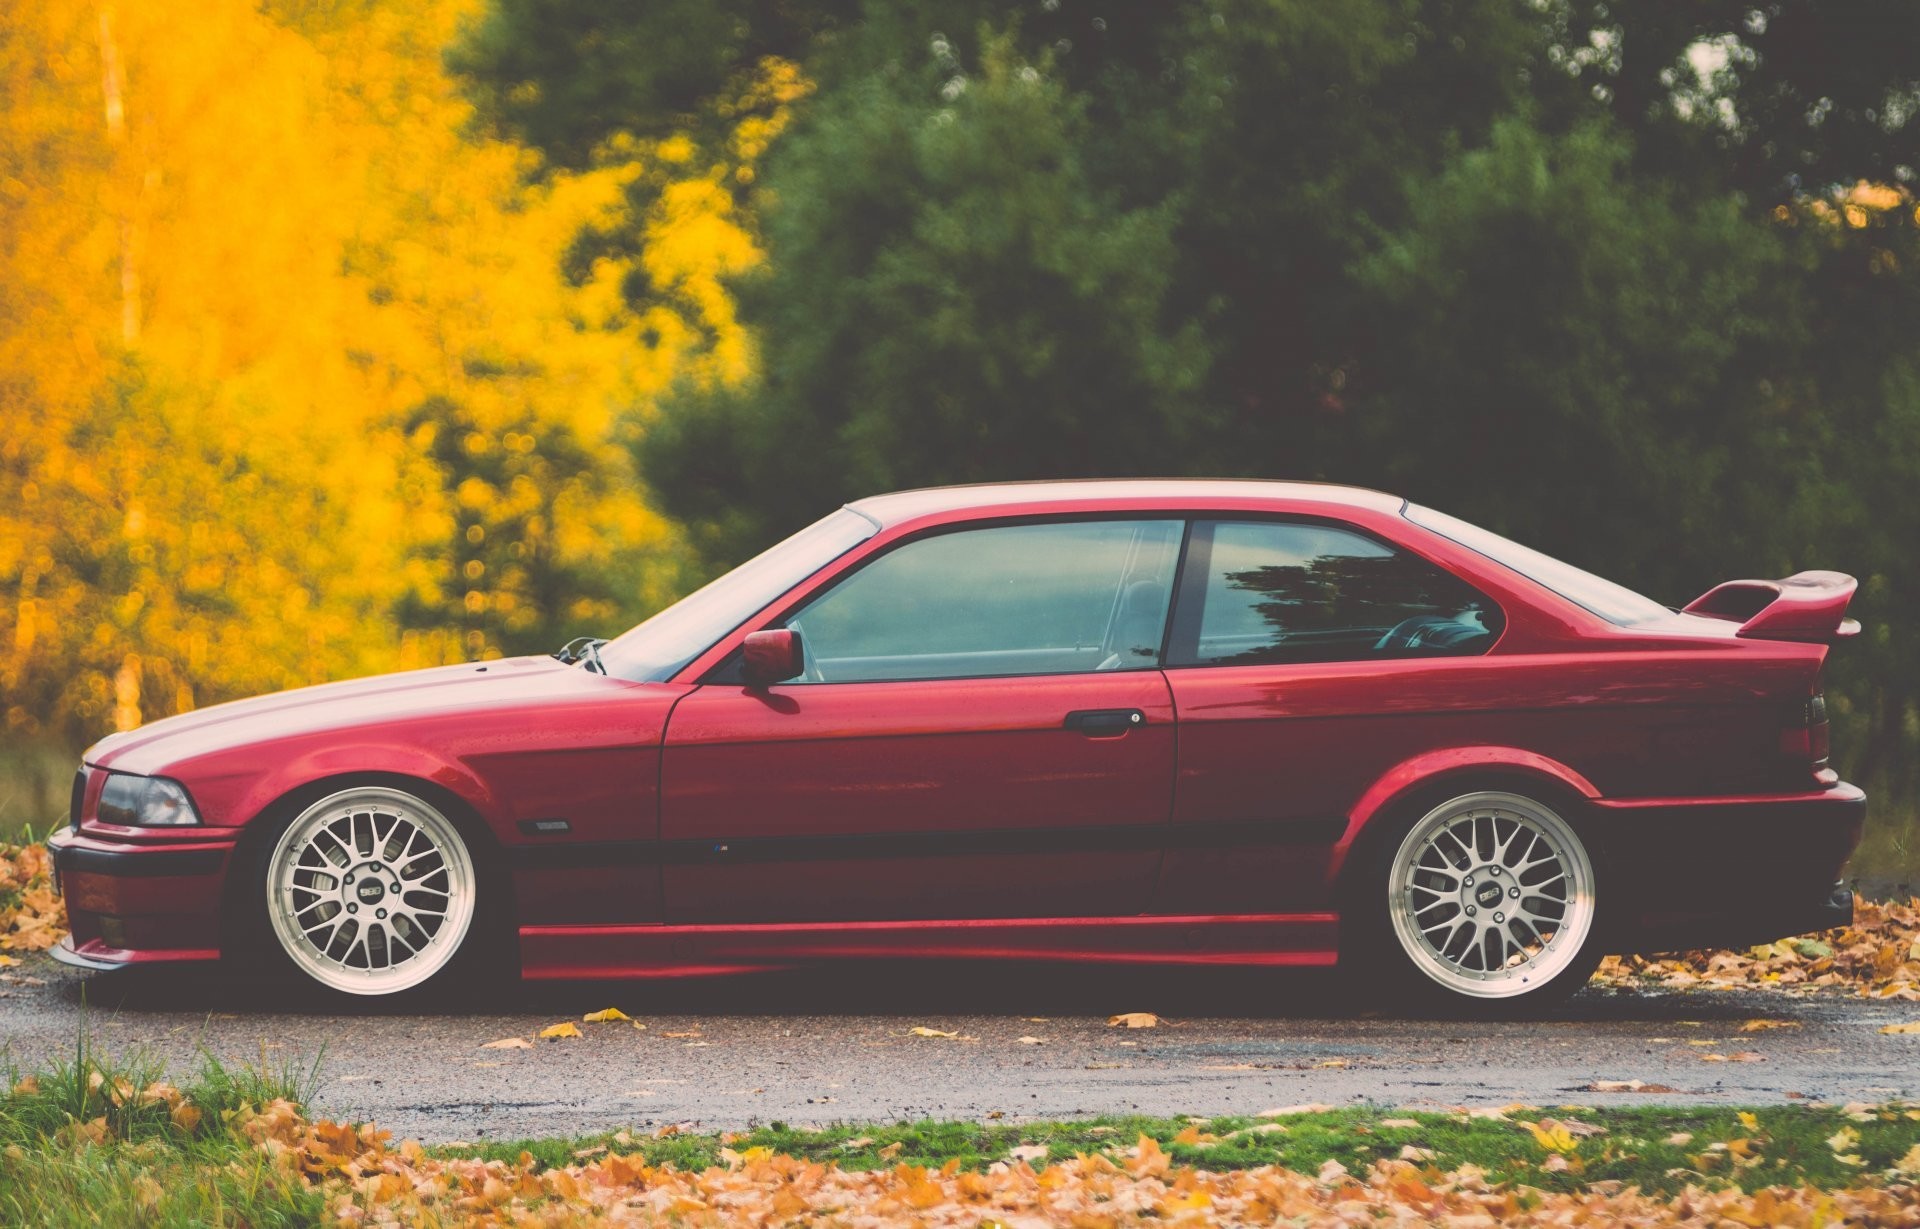 1920x1229 bmw e36 m3 bmw tuning stance red